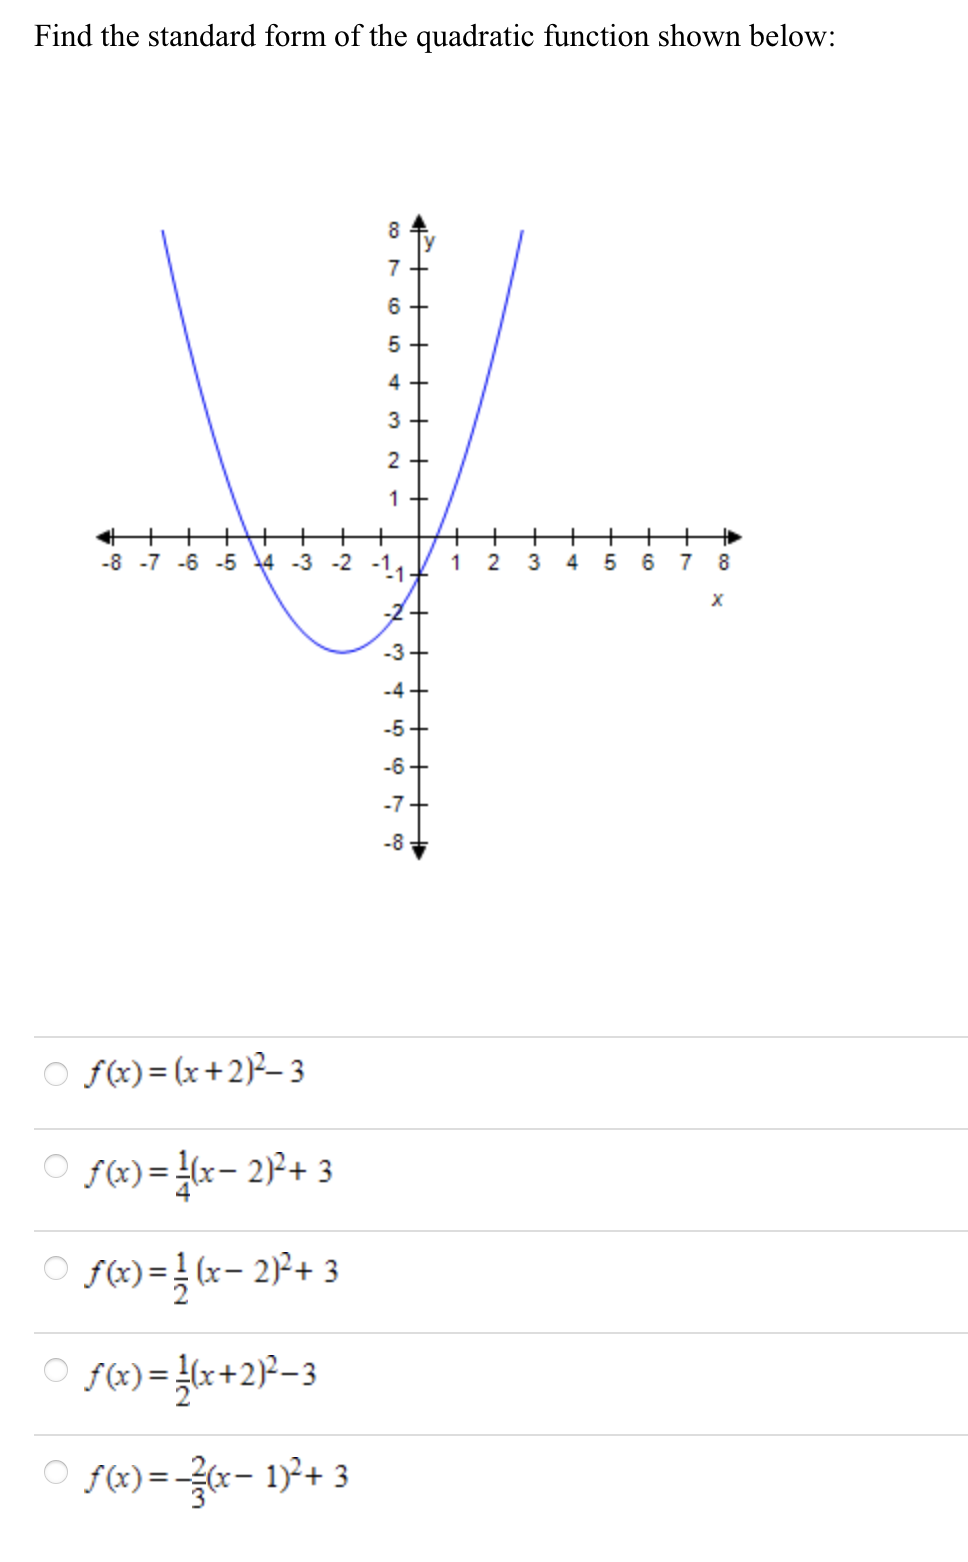 Find the standard form of the quadratic function shown below:
8
7 +
6 +
4 +
3
2 +
1 +
+
-8 -7 -6 -5 4 -3 -2 -1,.
1 2
3
4
6 7 8
-3+
-4+
-5+
-6+
-7
-8
O f(x)= (x+2)²–3
O f(x)= x- 2P+ 3
f(x) = } (x- 2)²+ 3
O f(«)=x- 1)2+ 3
+++ ++ +
